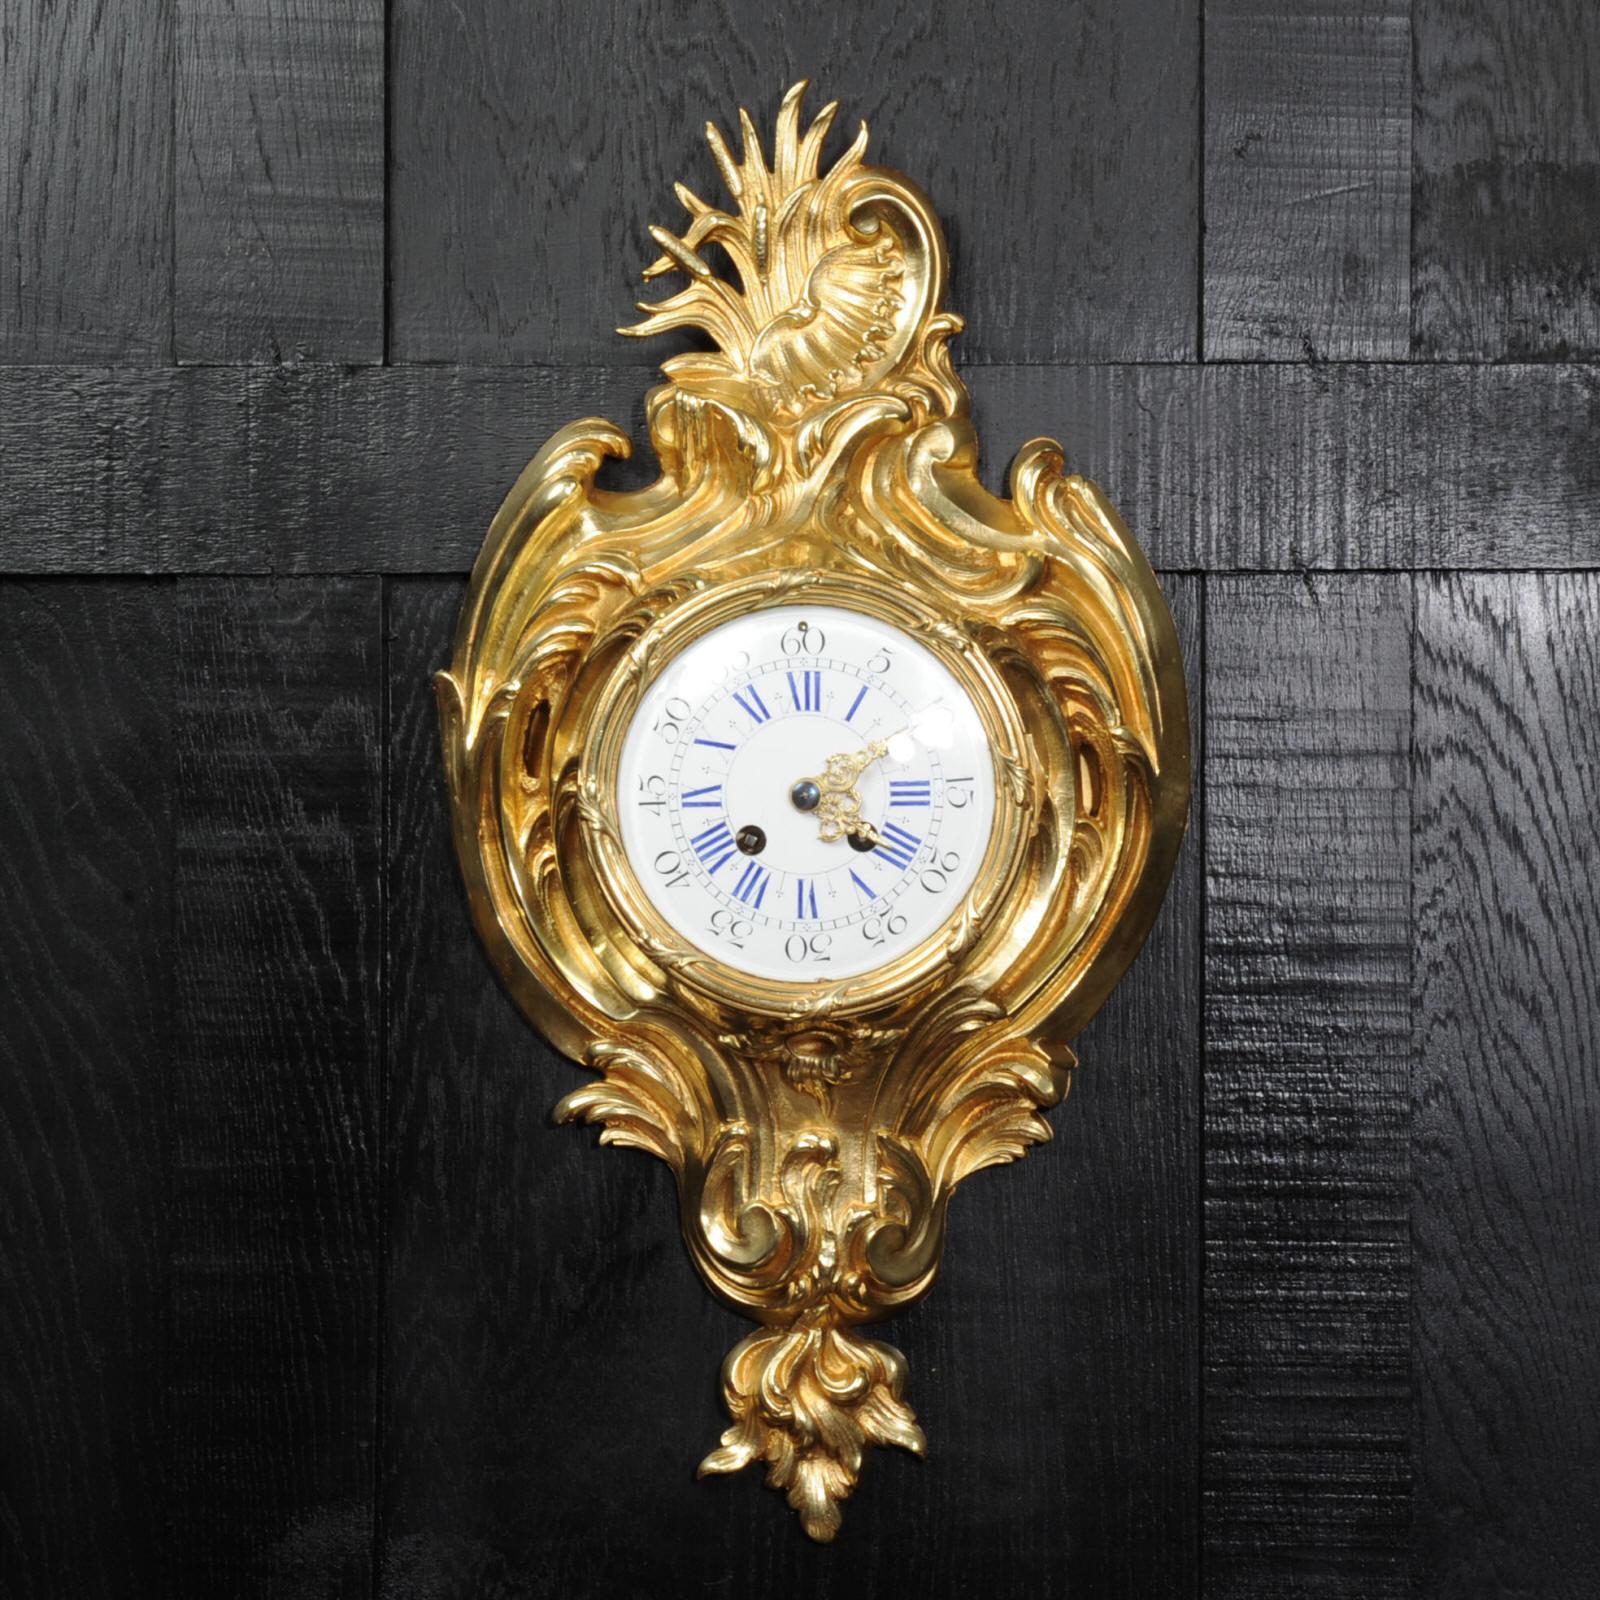 A beautiful original antique French cartel wall clock, circa 1890. It is finely made in gilt bronze in the Rococo style. It is formed of flowing scrolls and acanthus with an elaborate asymmetric C-scroll and shell motif to the top. It is in stunning